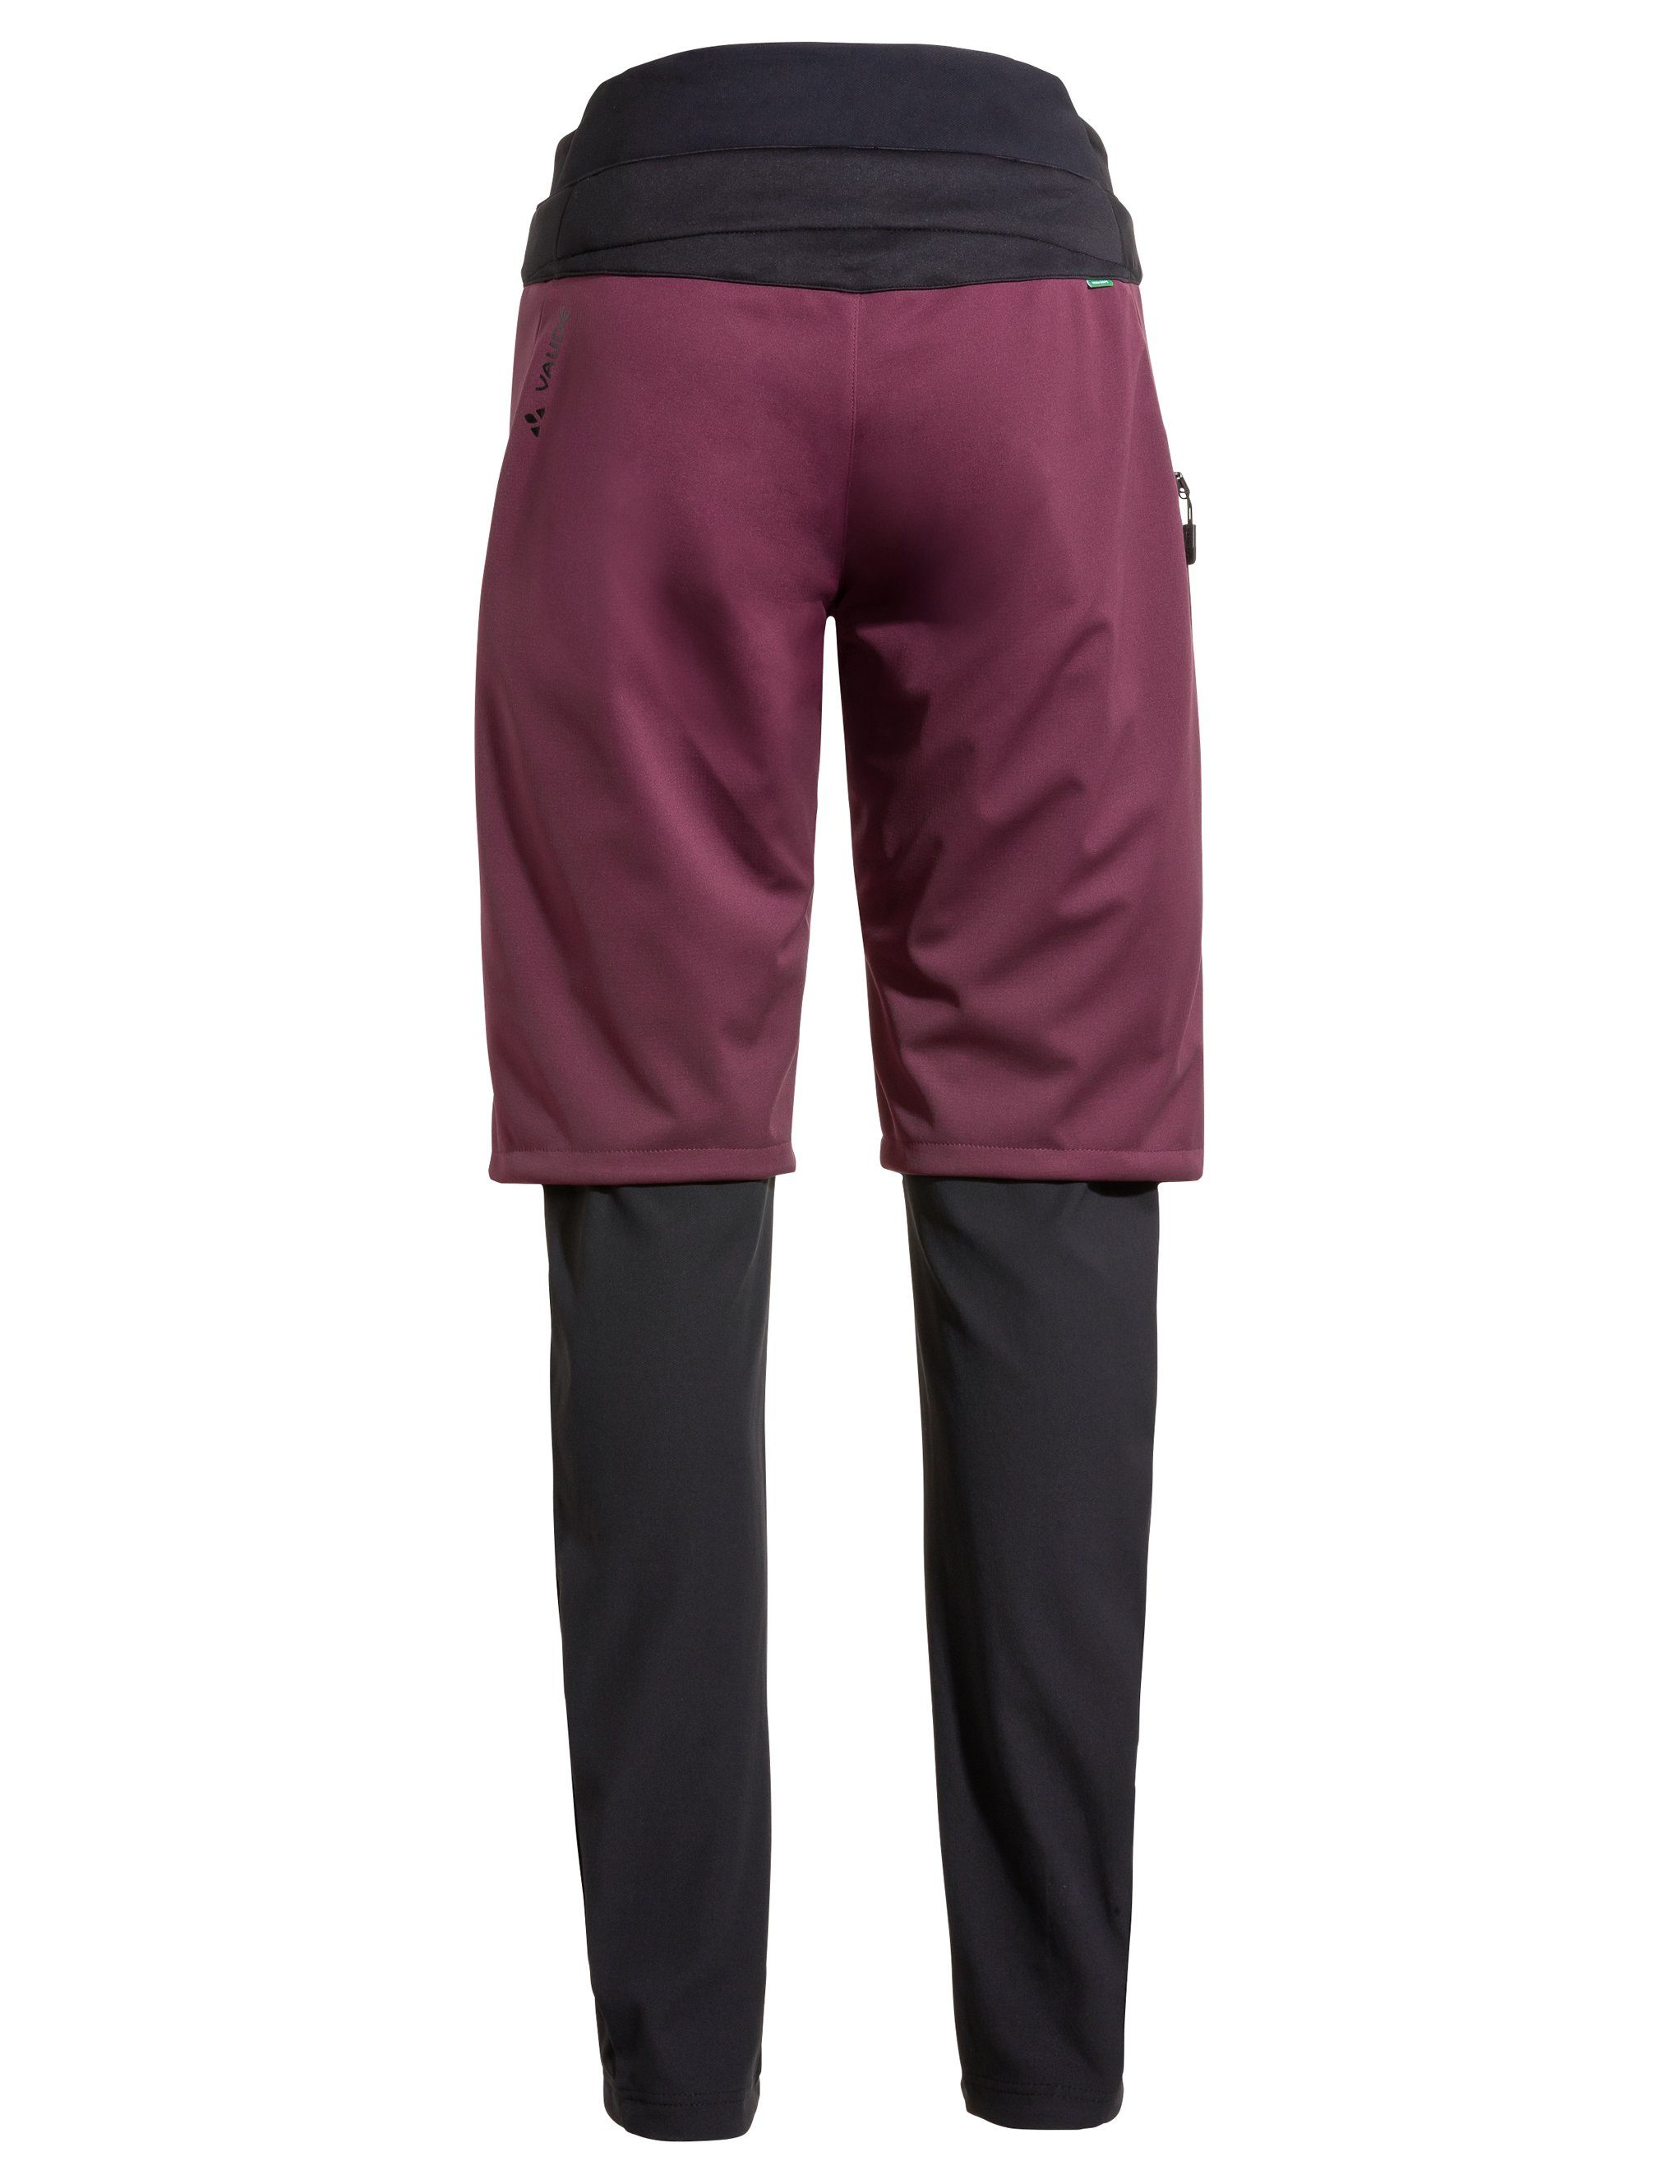 VAUDE Women's cassis Knopf w/o Year (1-tlg) Funktionshose All Grüner SC Moab Pants 3in1